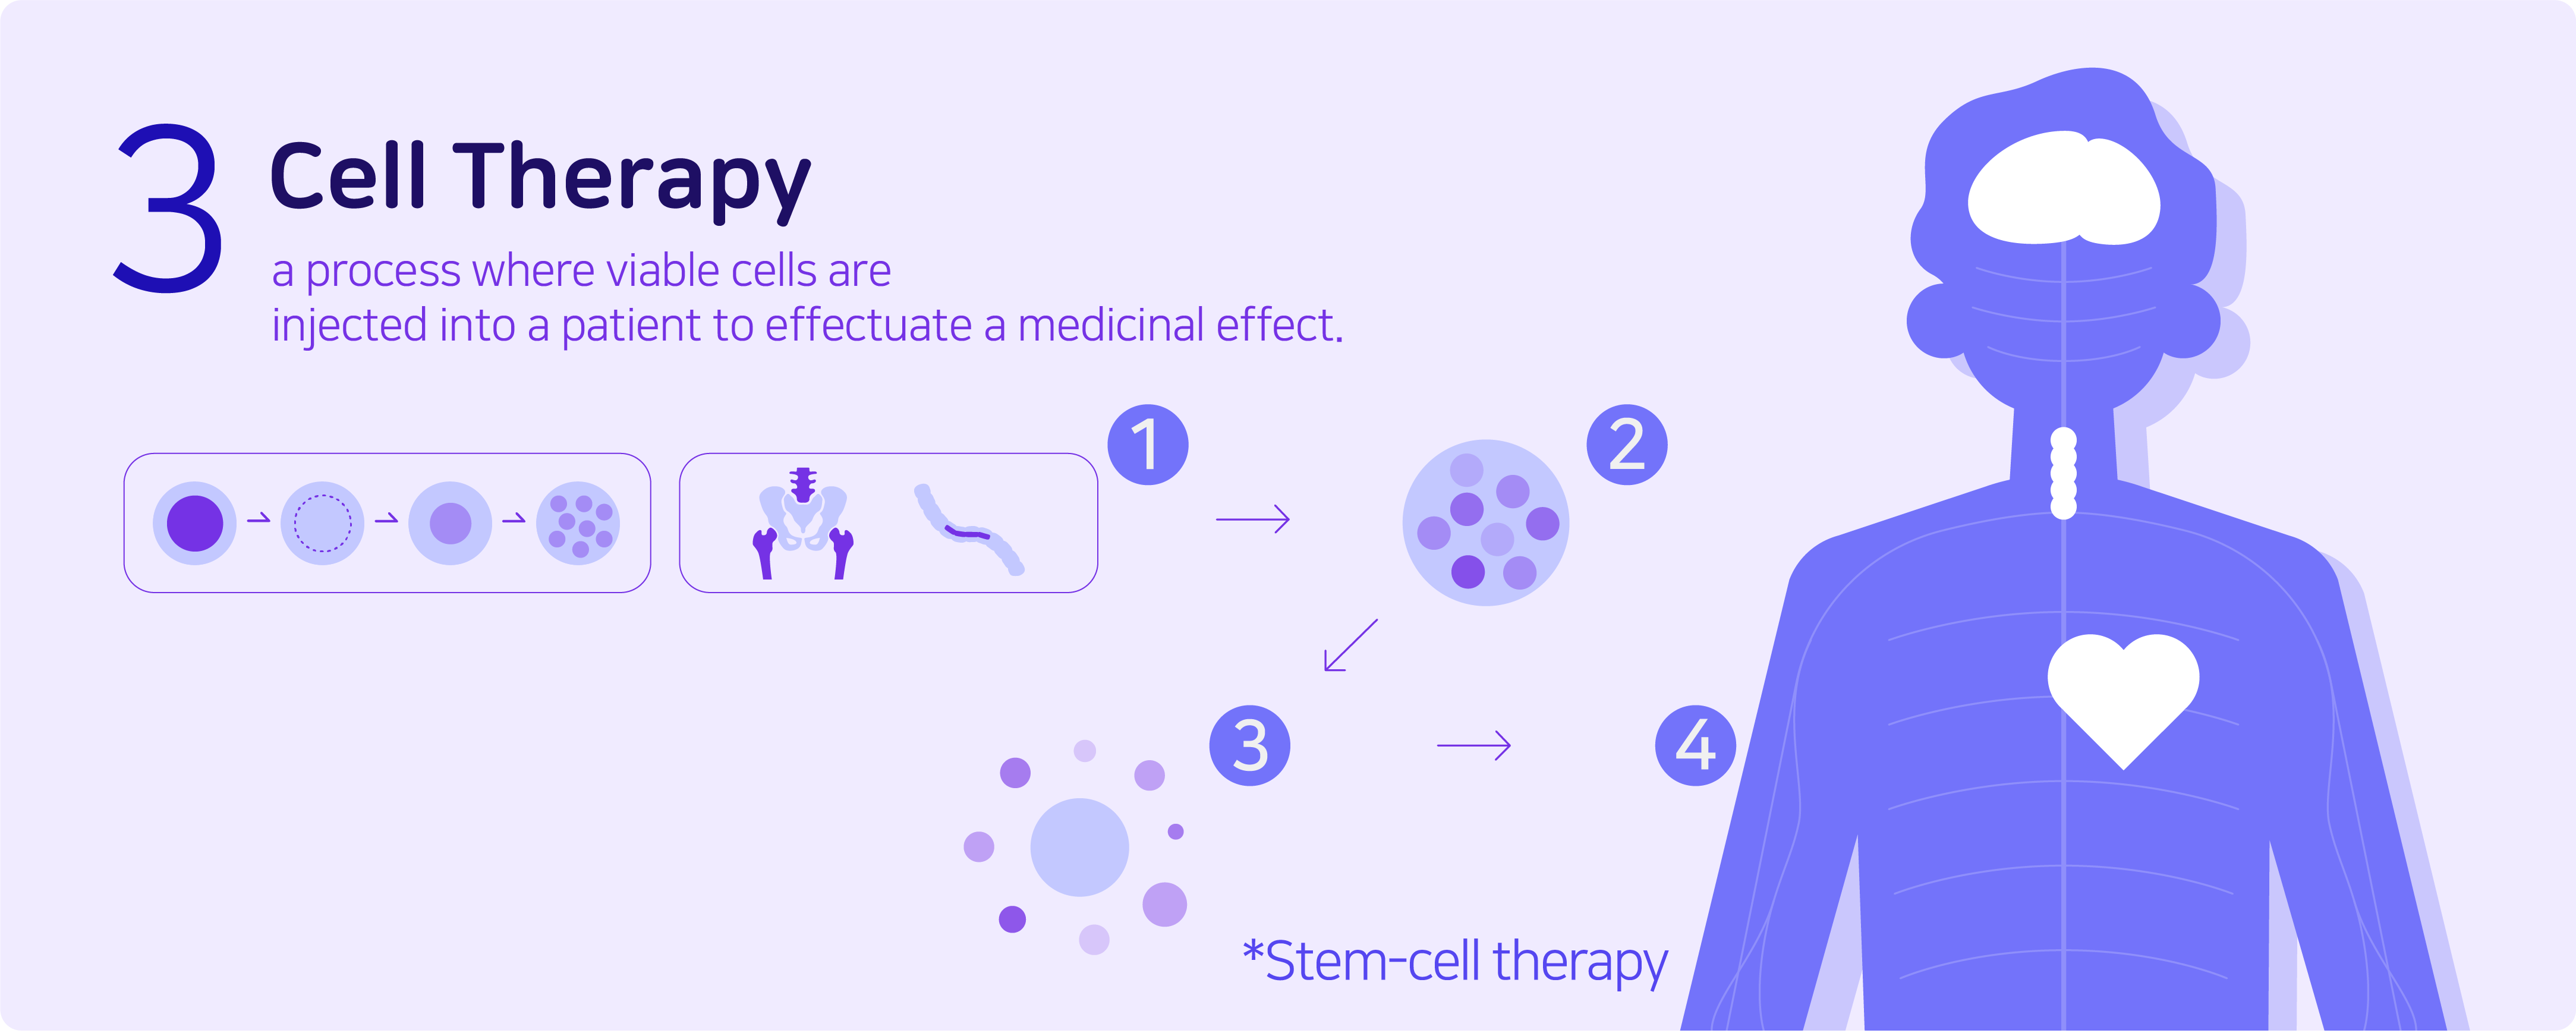 3. Cell Therapy - a process where viable cells are injected into a patient to effectuate a medicinal effect. *Stem-cell therapy